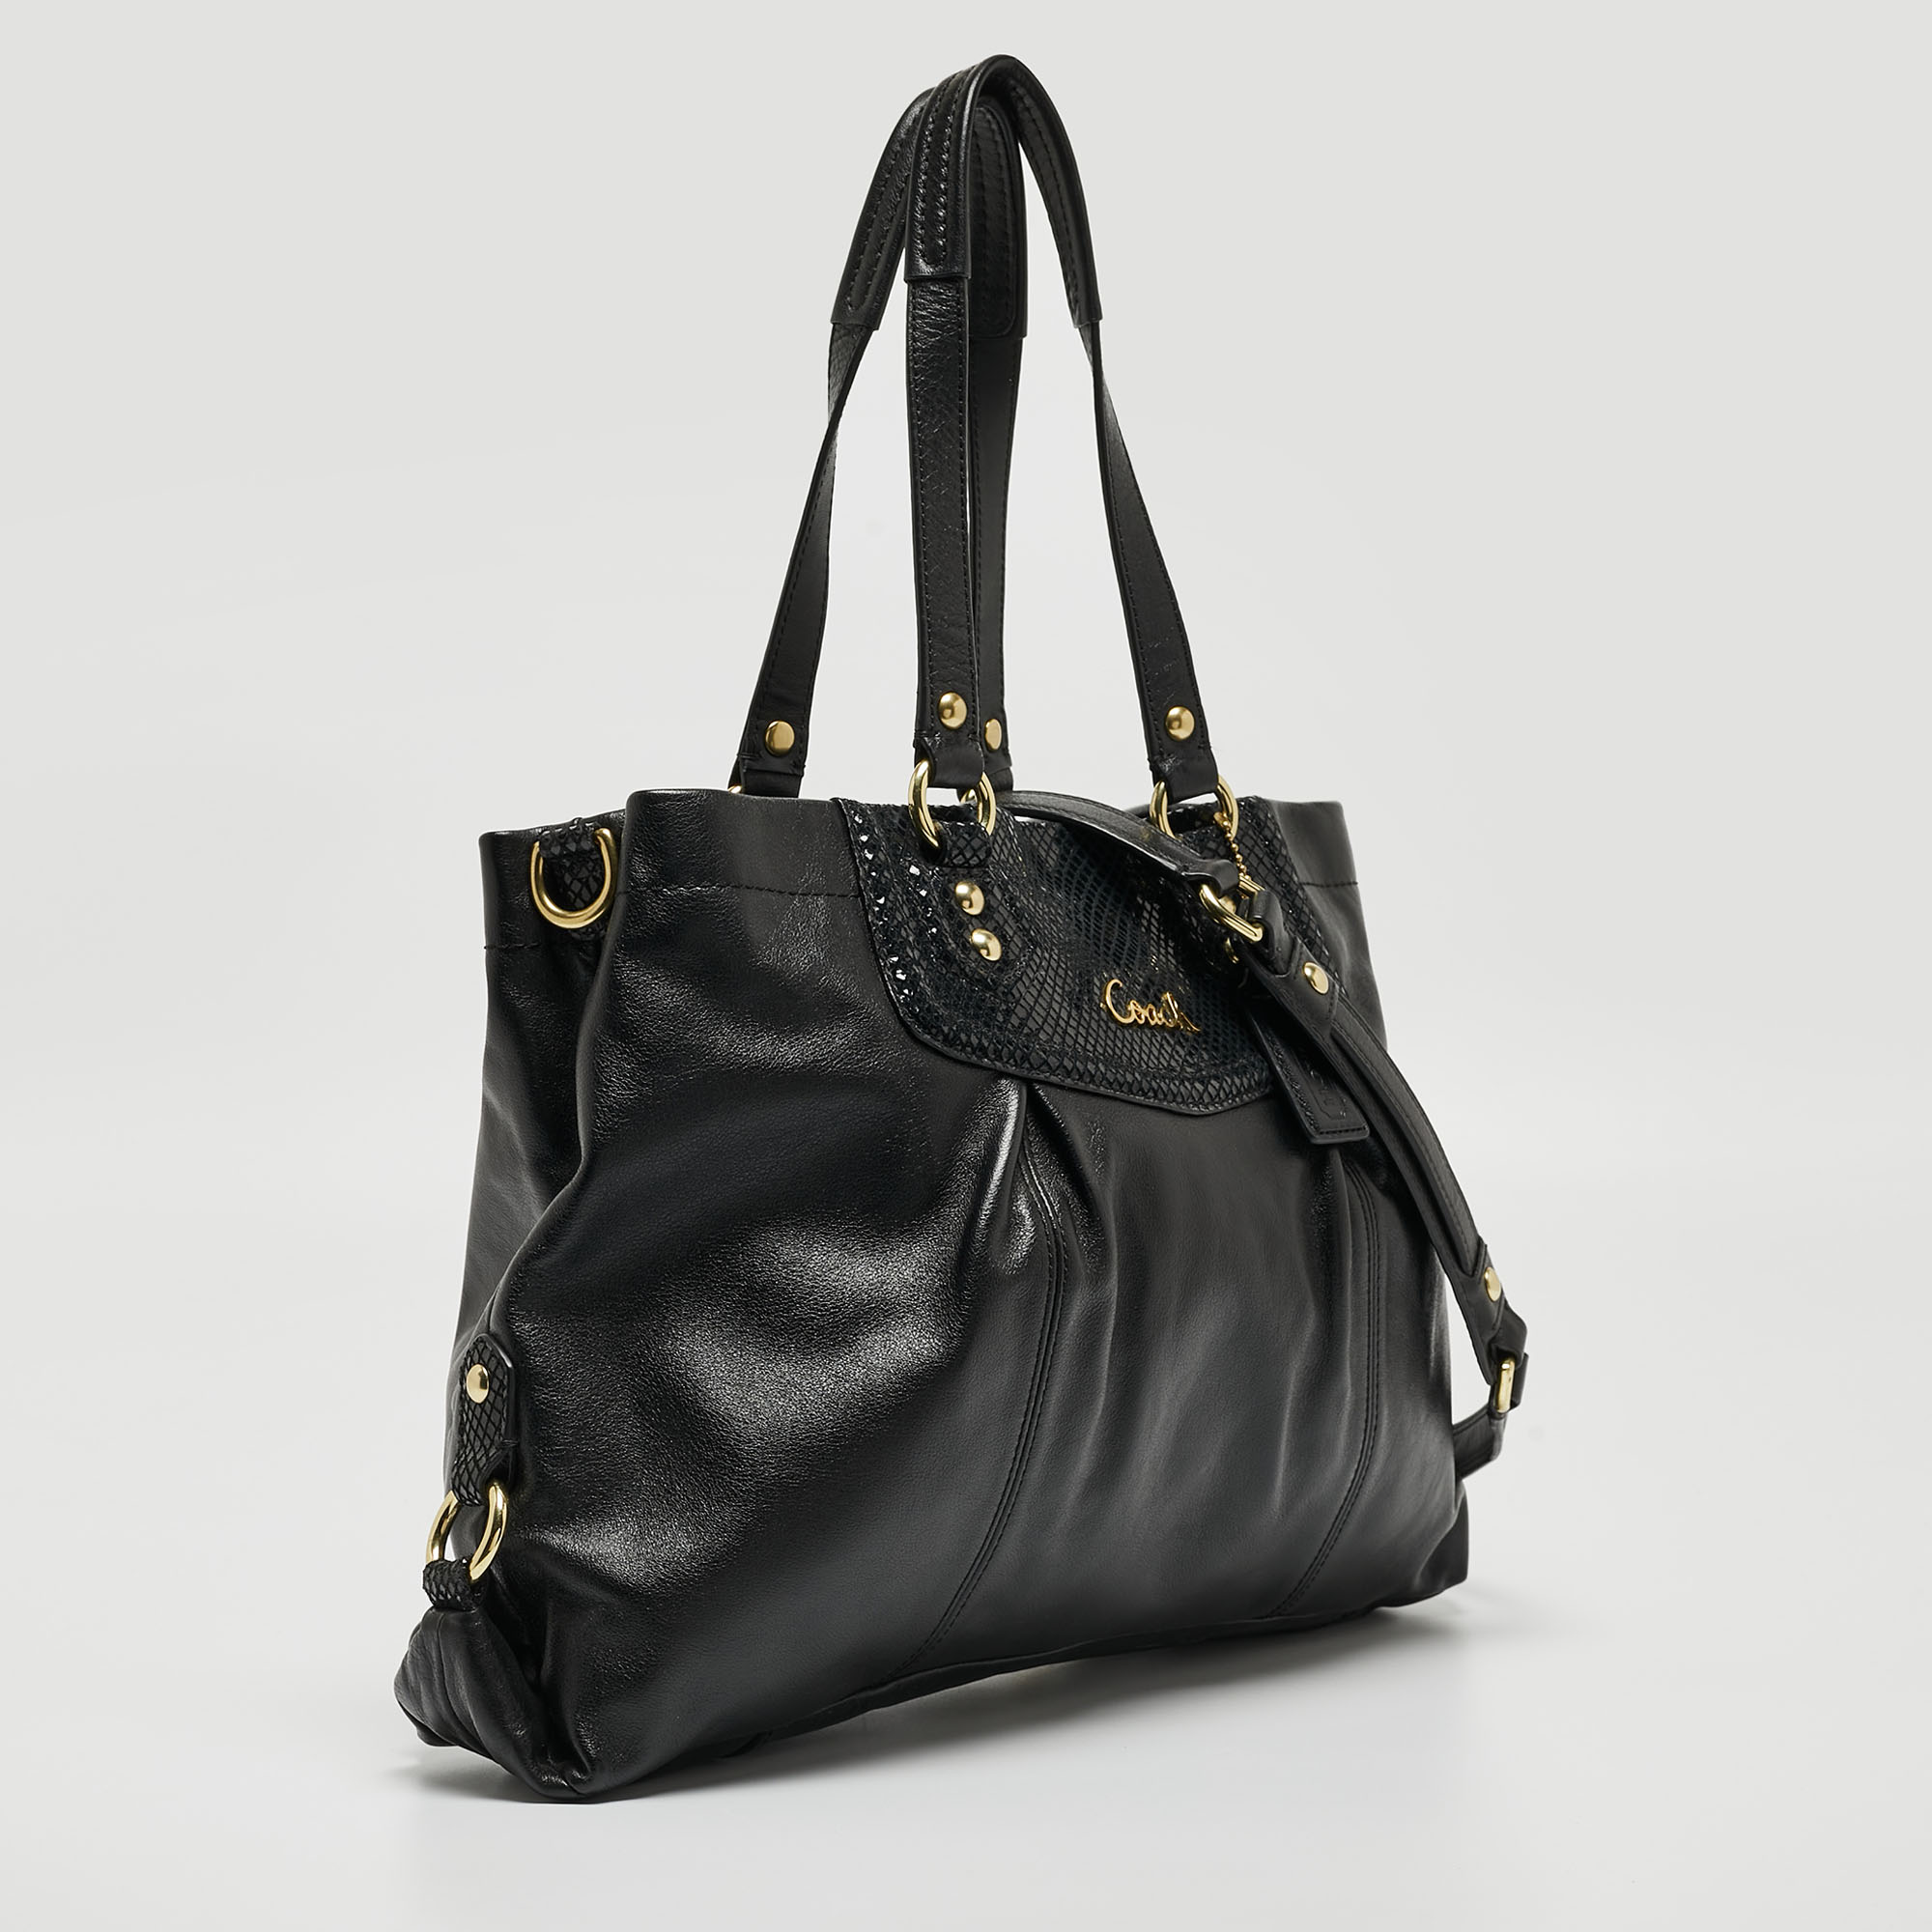 Coach Black Leather And Snakeskin Embossed Leather Ashley Tote